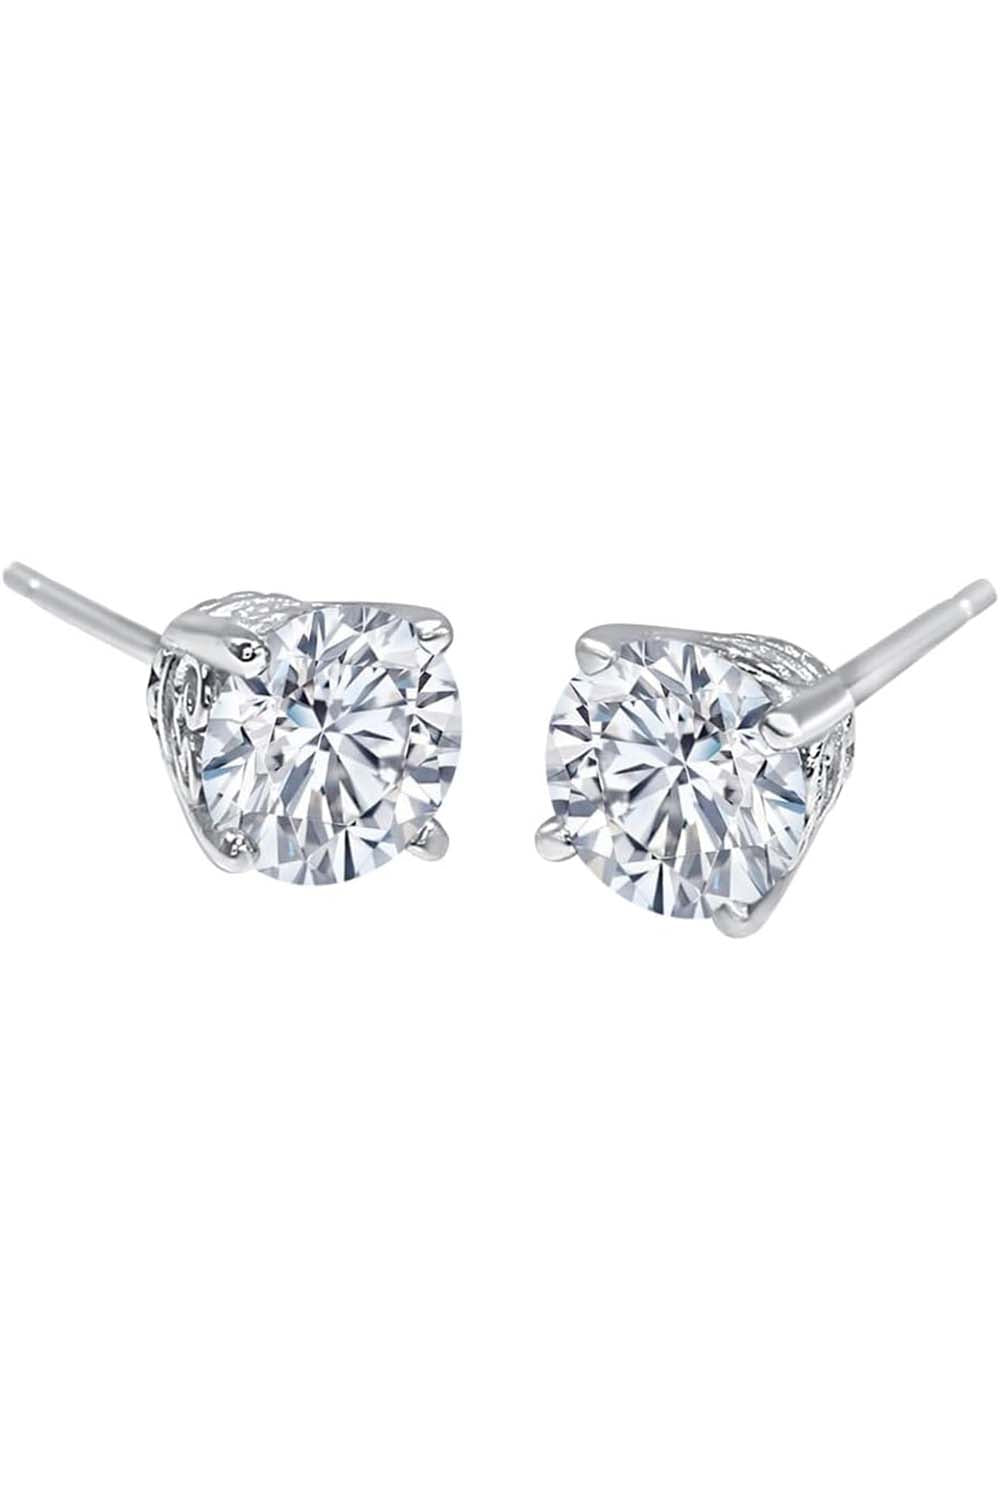 White Gold Color Vintage Solitaire Stud Earrings for Women